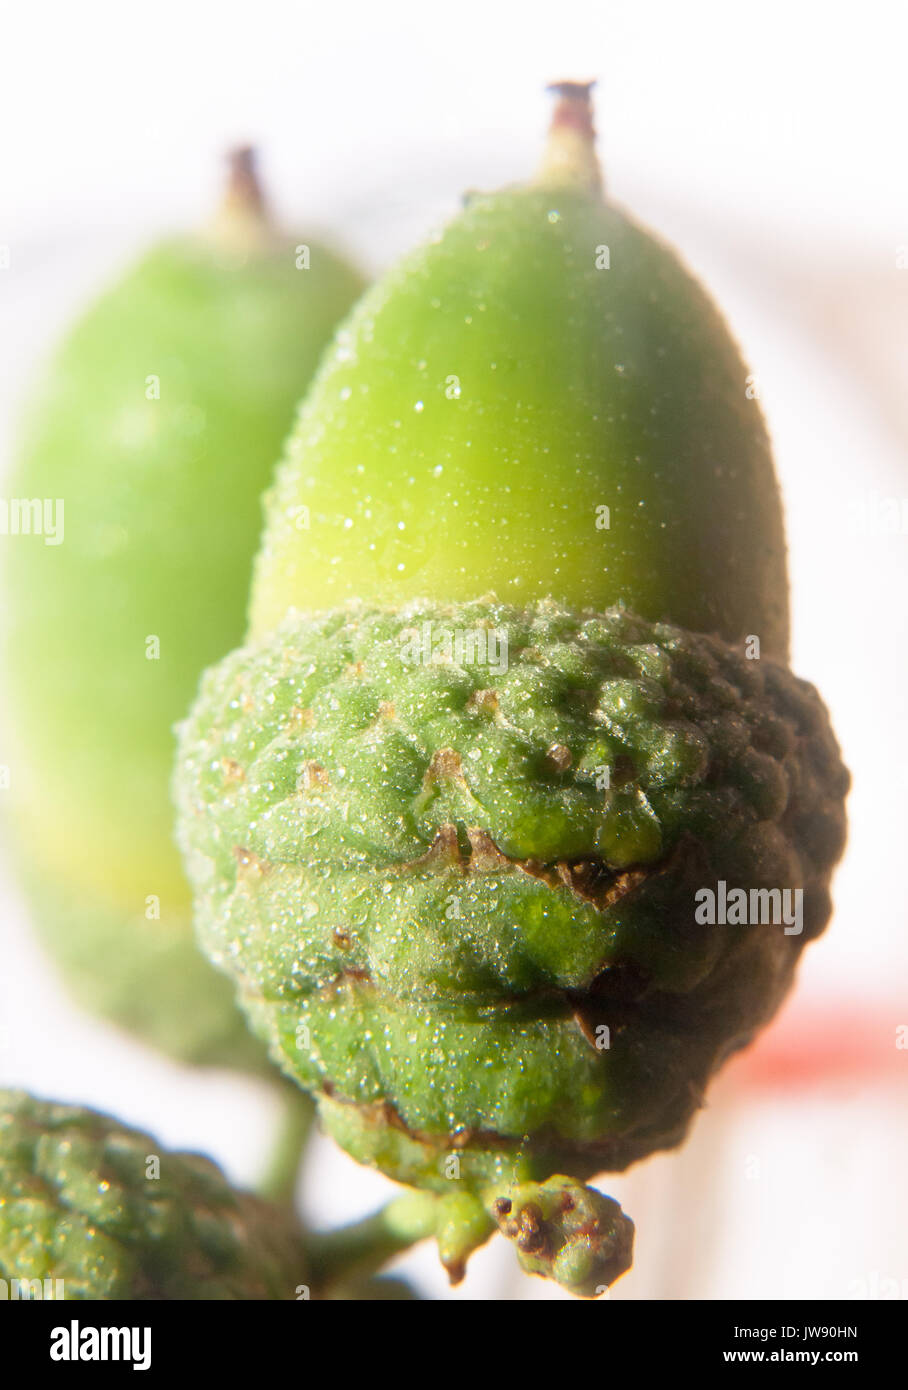 close up of green acorn on white background in studio wet water dew droplets Willow Oak, Quercus phellos; UK Stock Photo